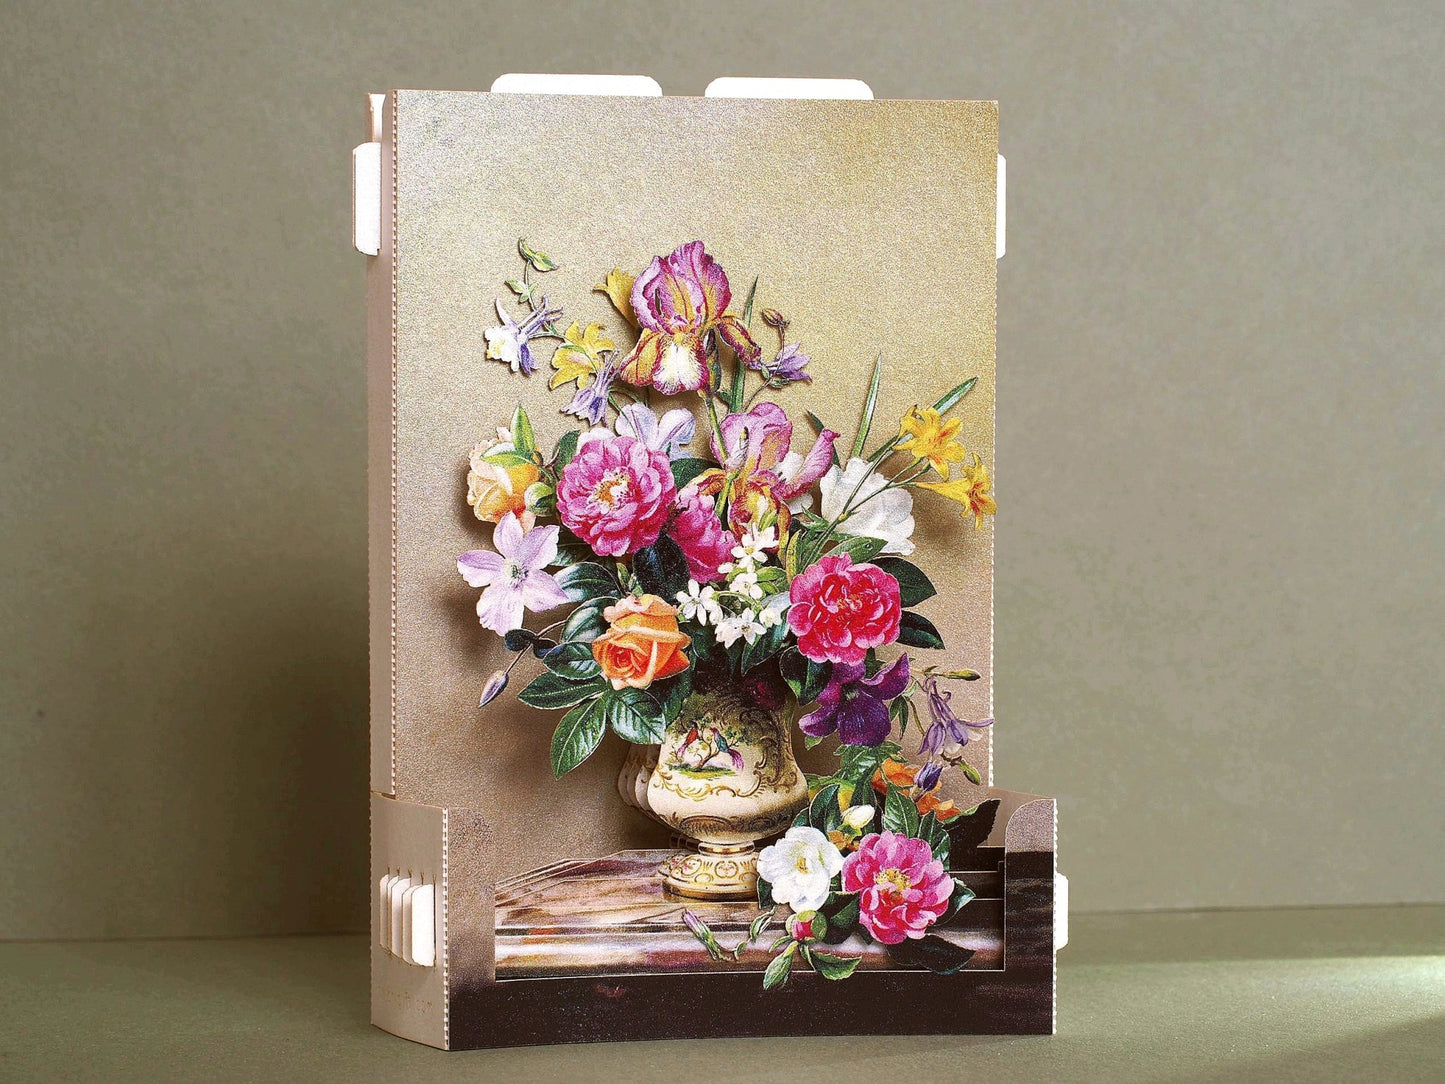 Mother's Day gift - paper flowers miniature. Pop up card. Rose, iris, aquilegia, clematis. - ColibriGift